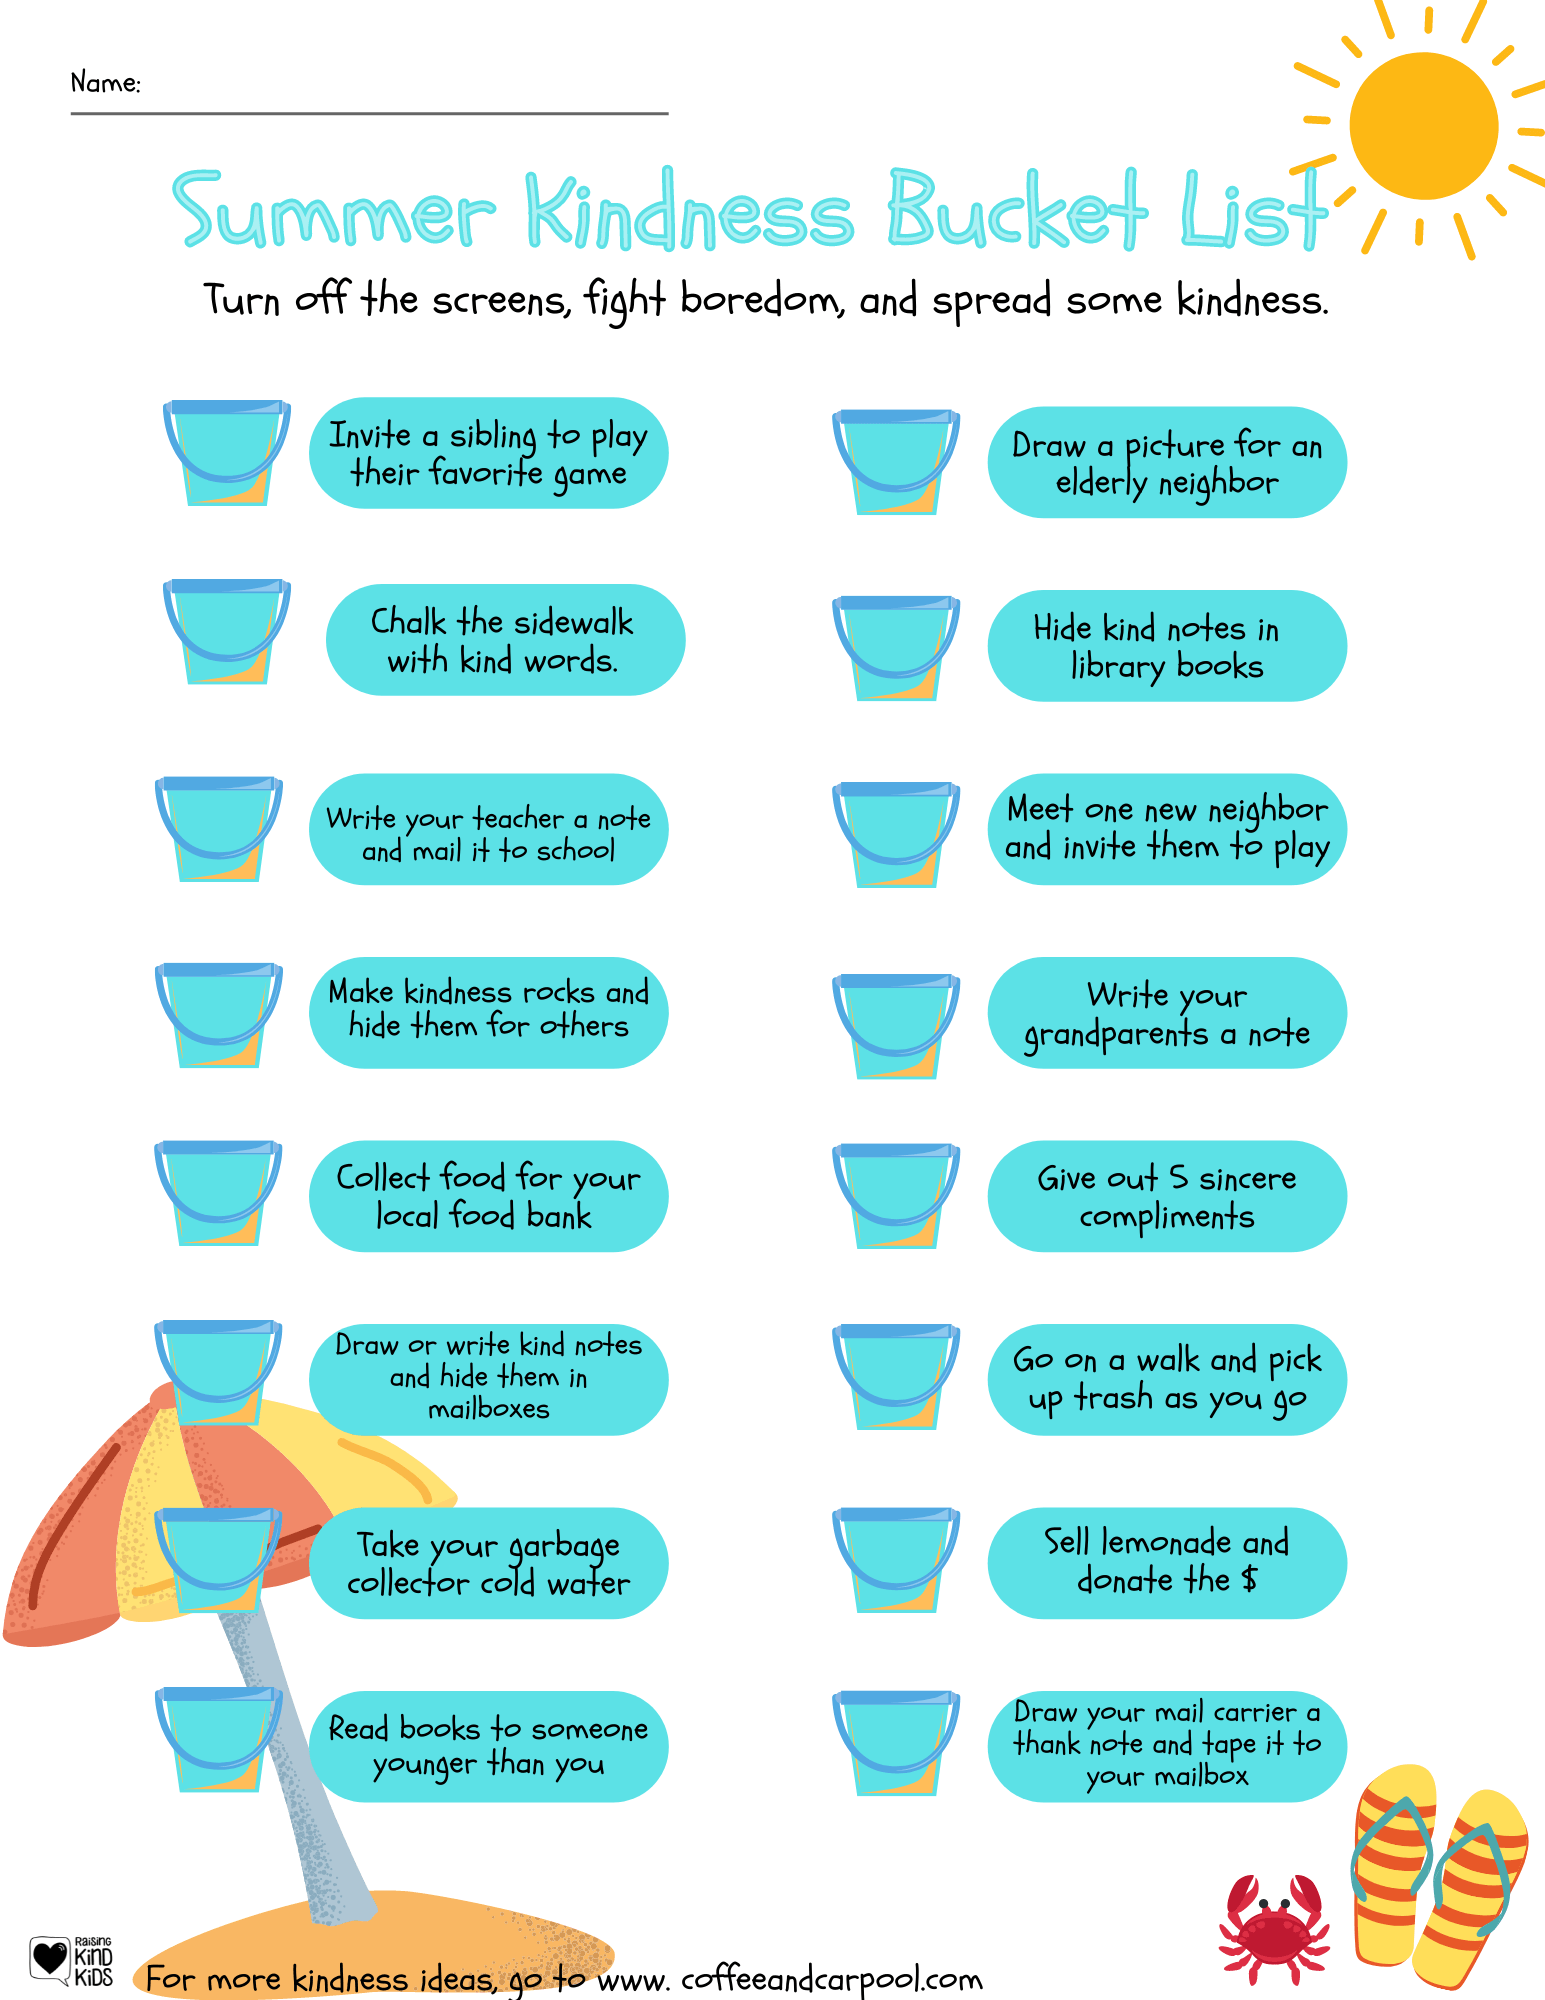 Use this summer kindness bucketlist to encourage your kids or students to act and speak with more kindness this summer and learn different ways to show their kindness. It's a great summer boredom buster for kids and families.